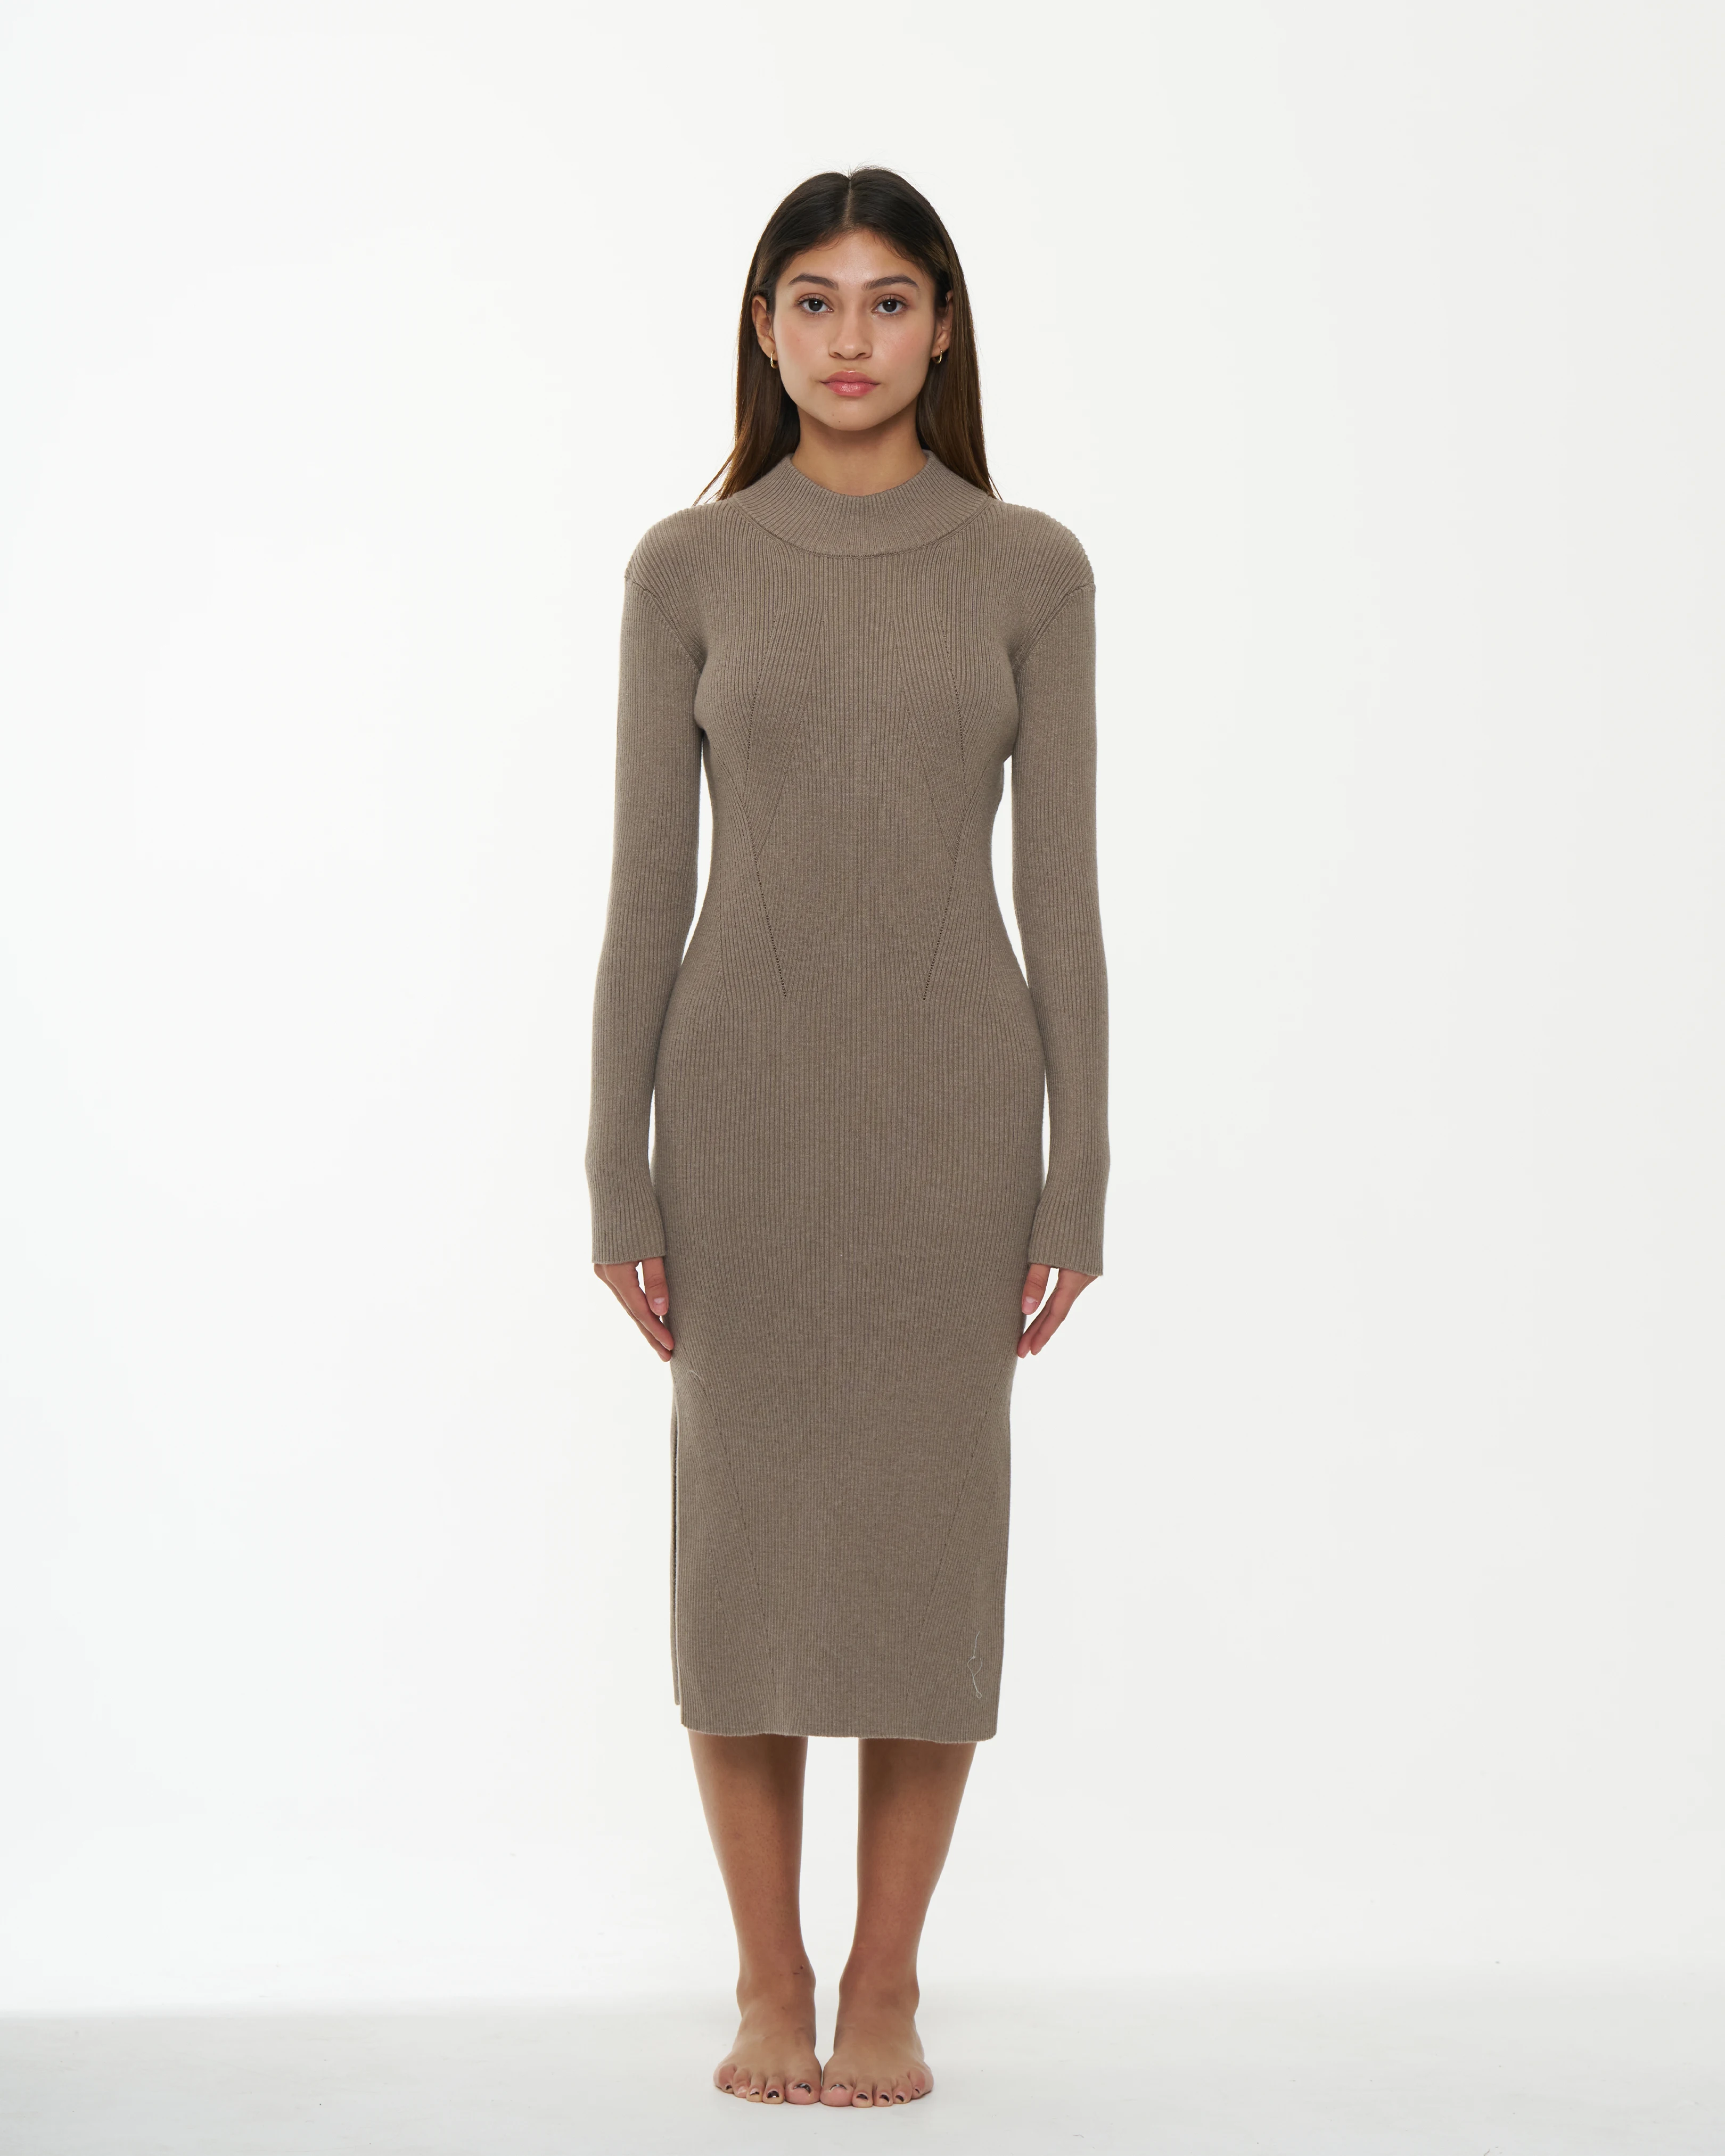 KNITTED SWEATER DRESS IN PEBBLE